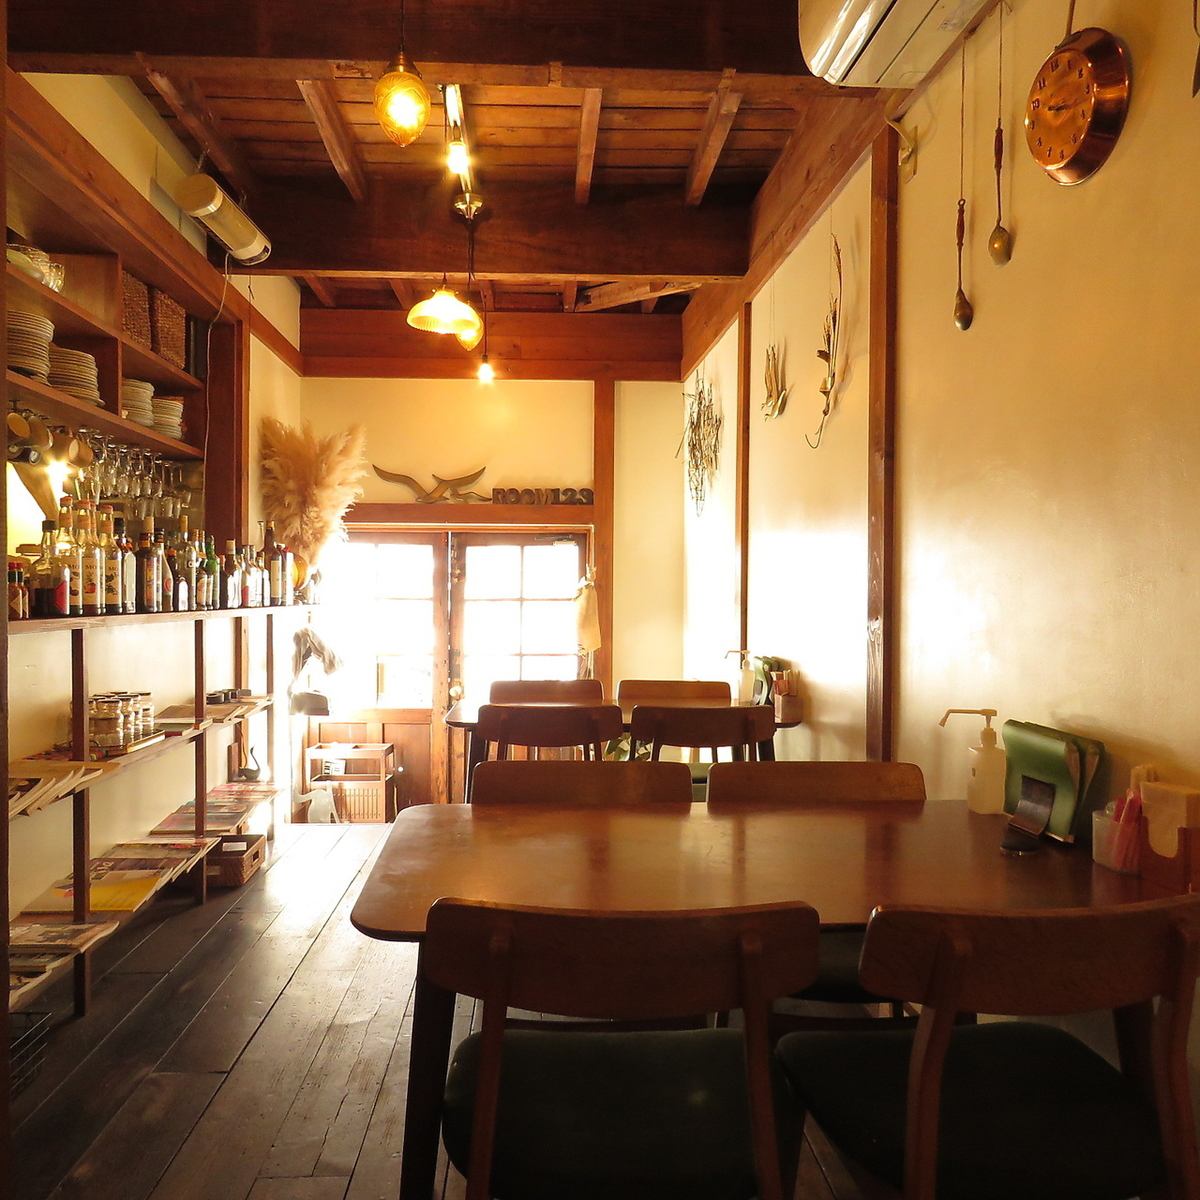 Enjoy "birthday / anniversary" and "women's association" fashionably in a cozy old folk house space ♪♪